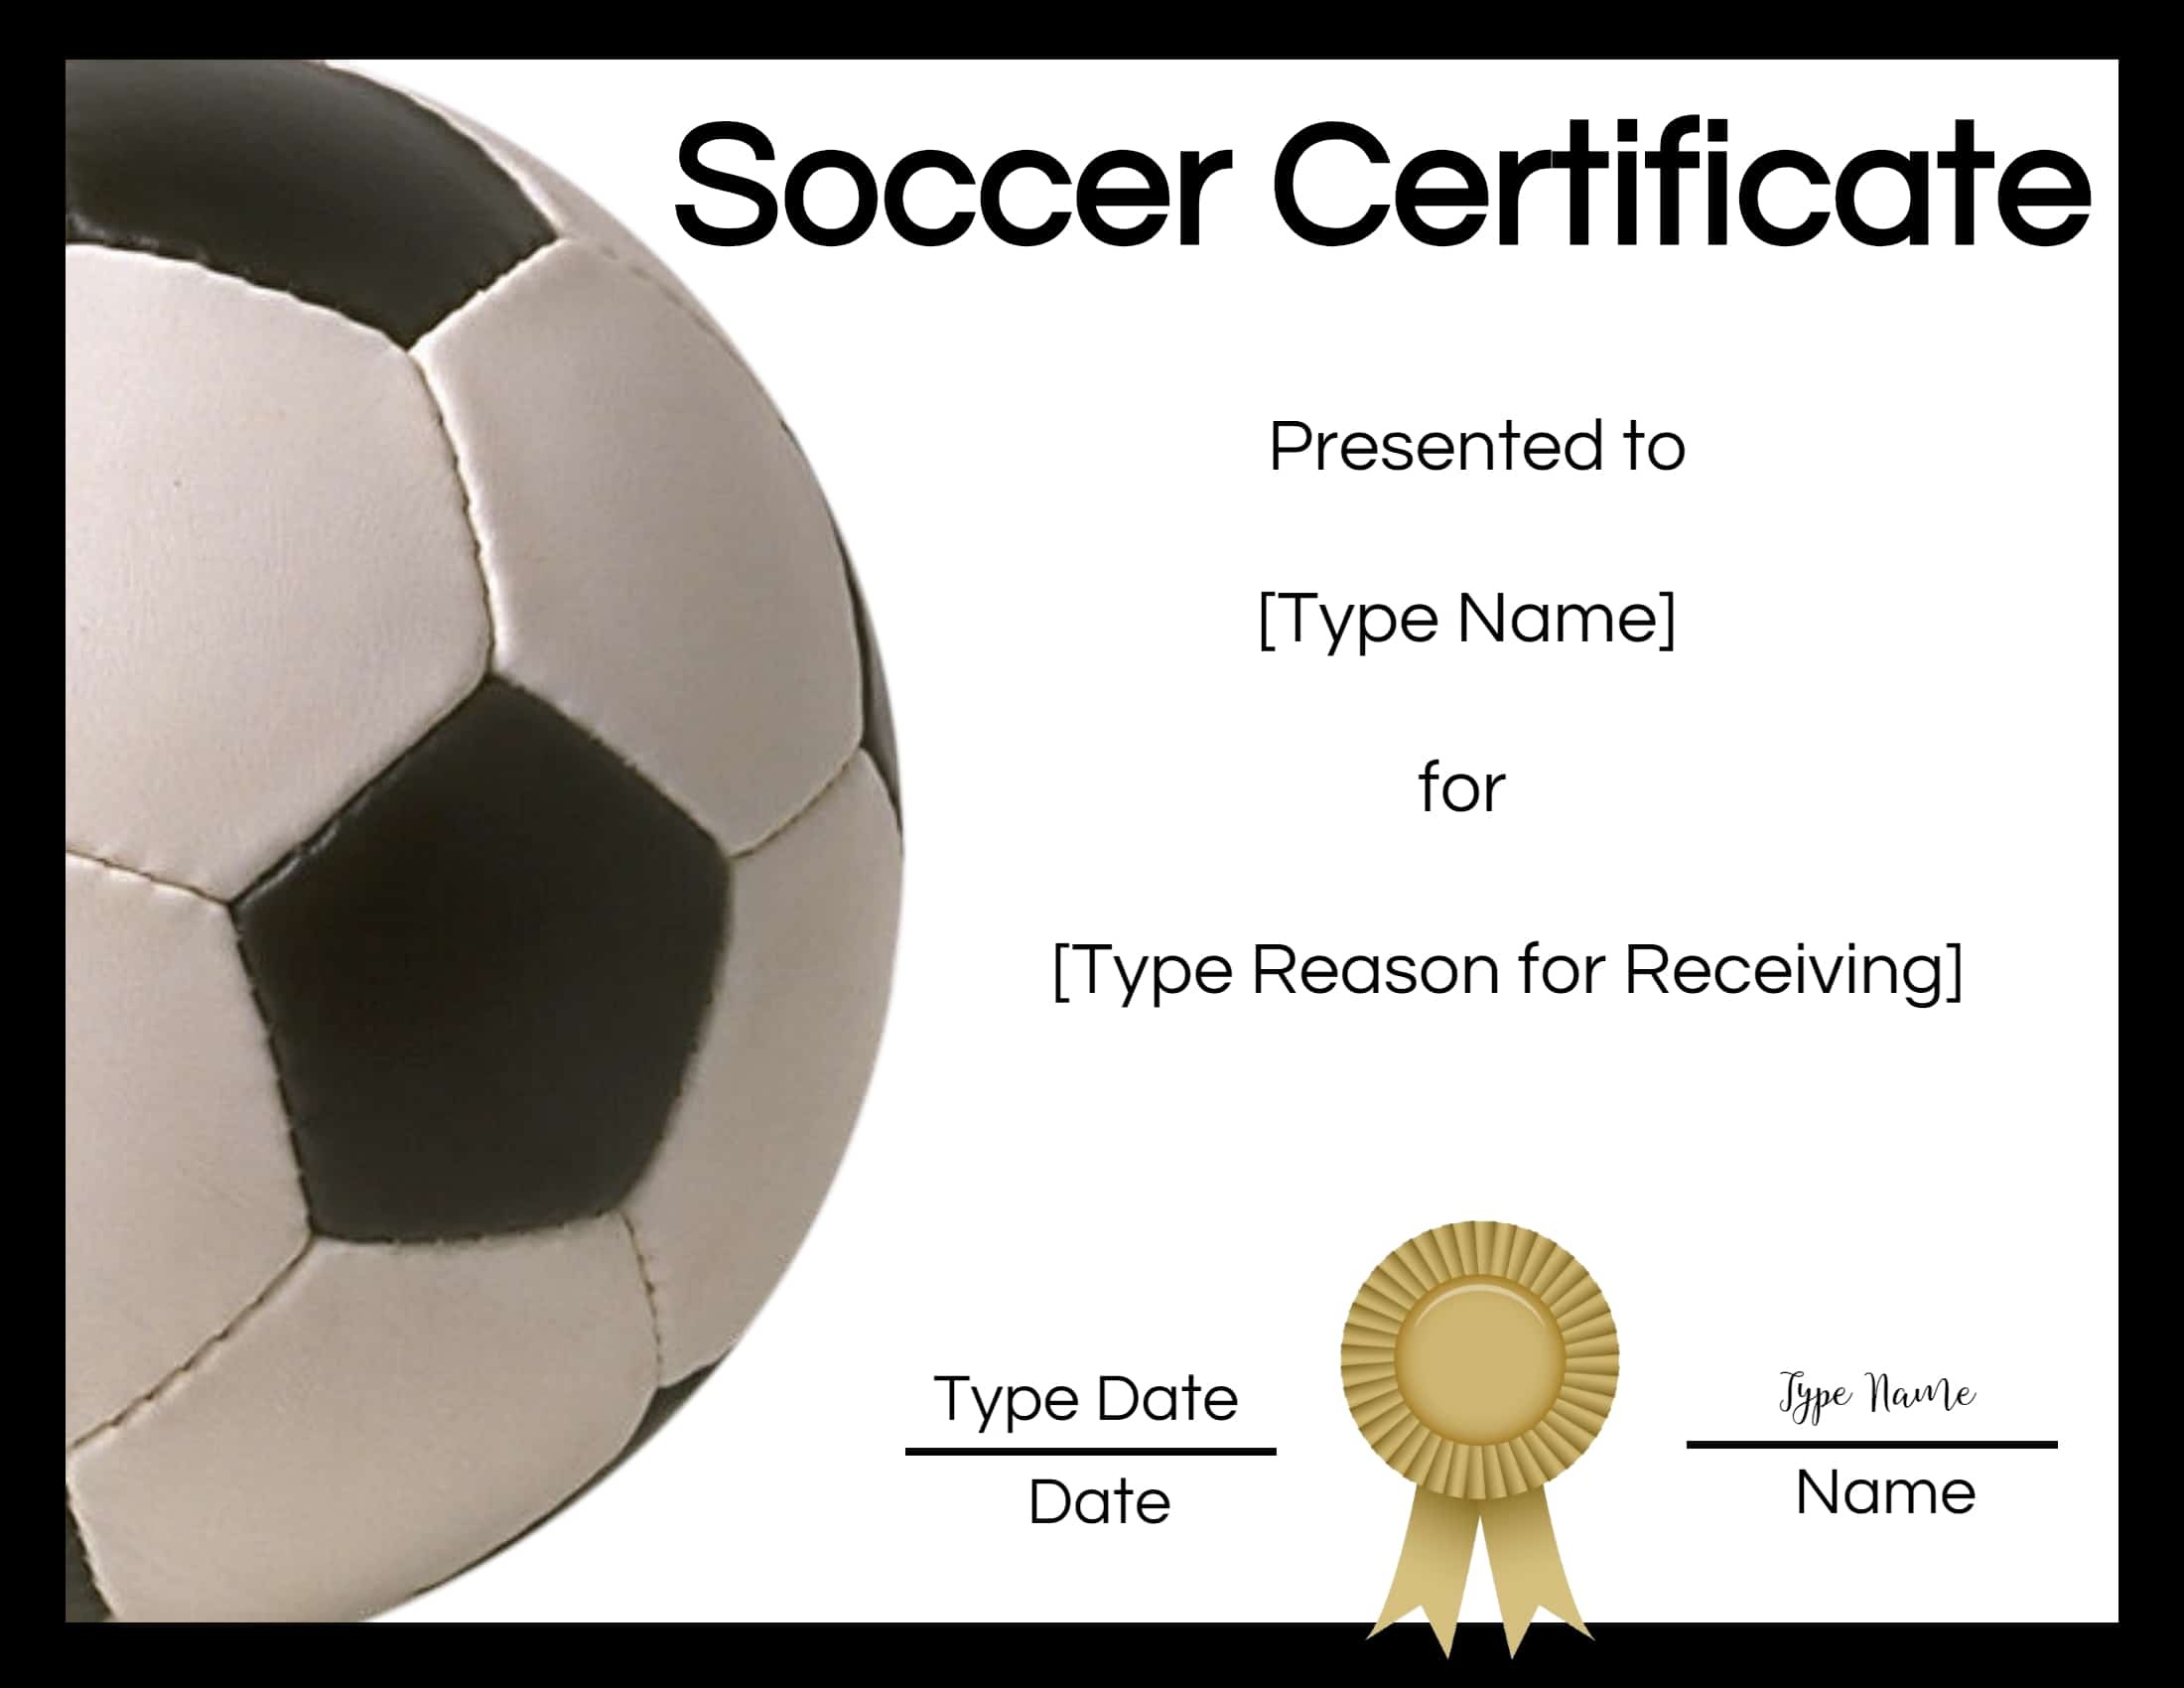 Free Soccer Certificate Maker | Edit Online And Print At Home - Free Printable Soccer Certificate Templates